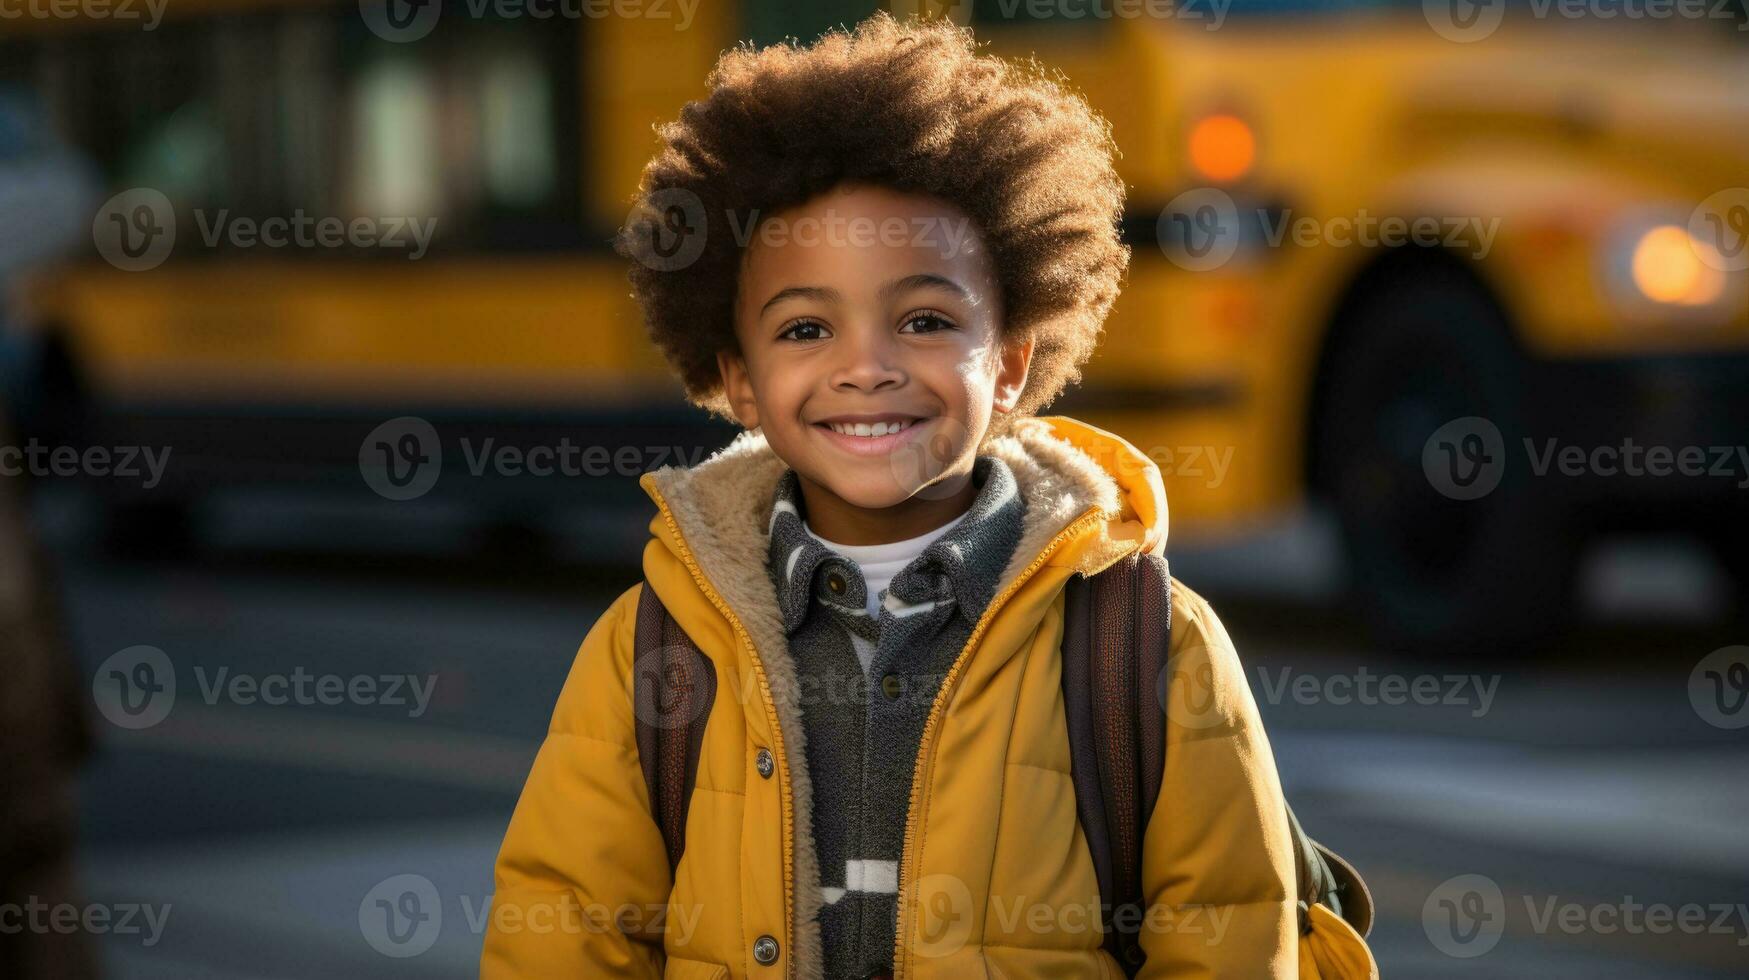 A young child eagerly stands in front of a school bus ready to embark on a new adventure filled with learning and friendships photo